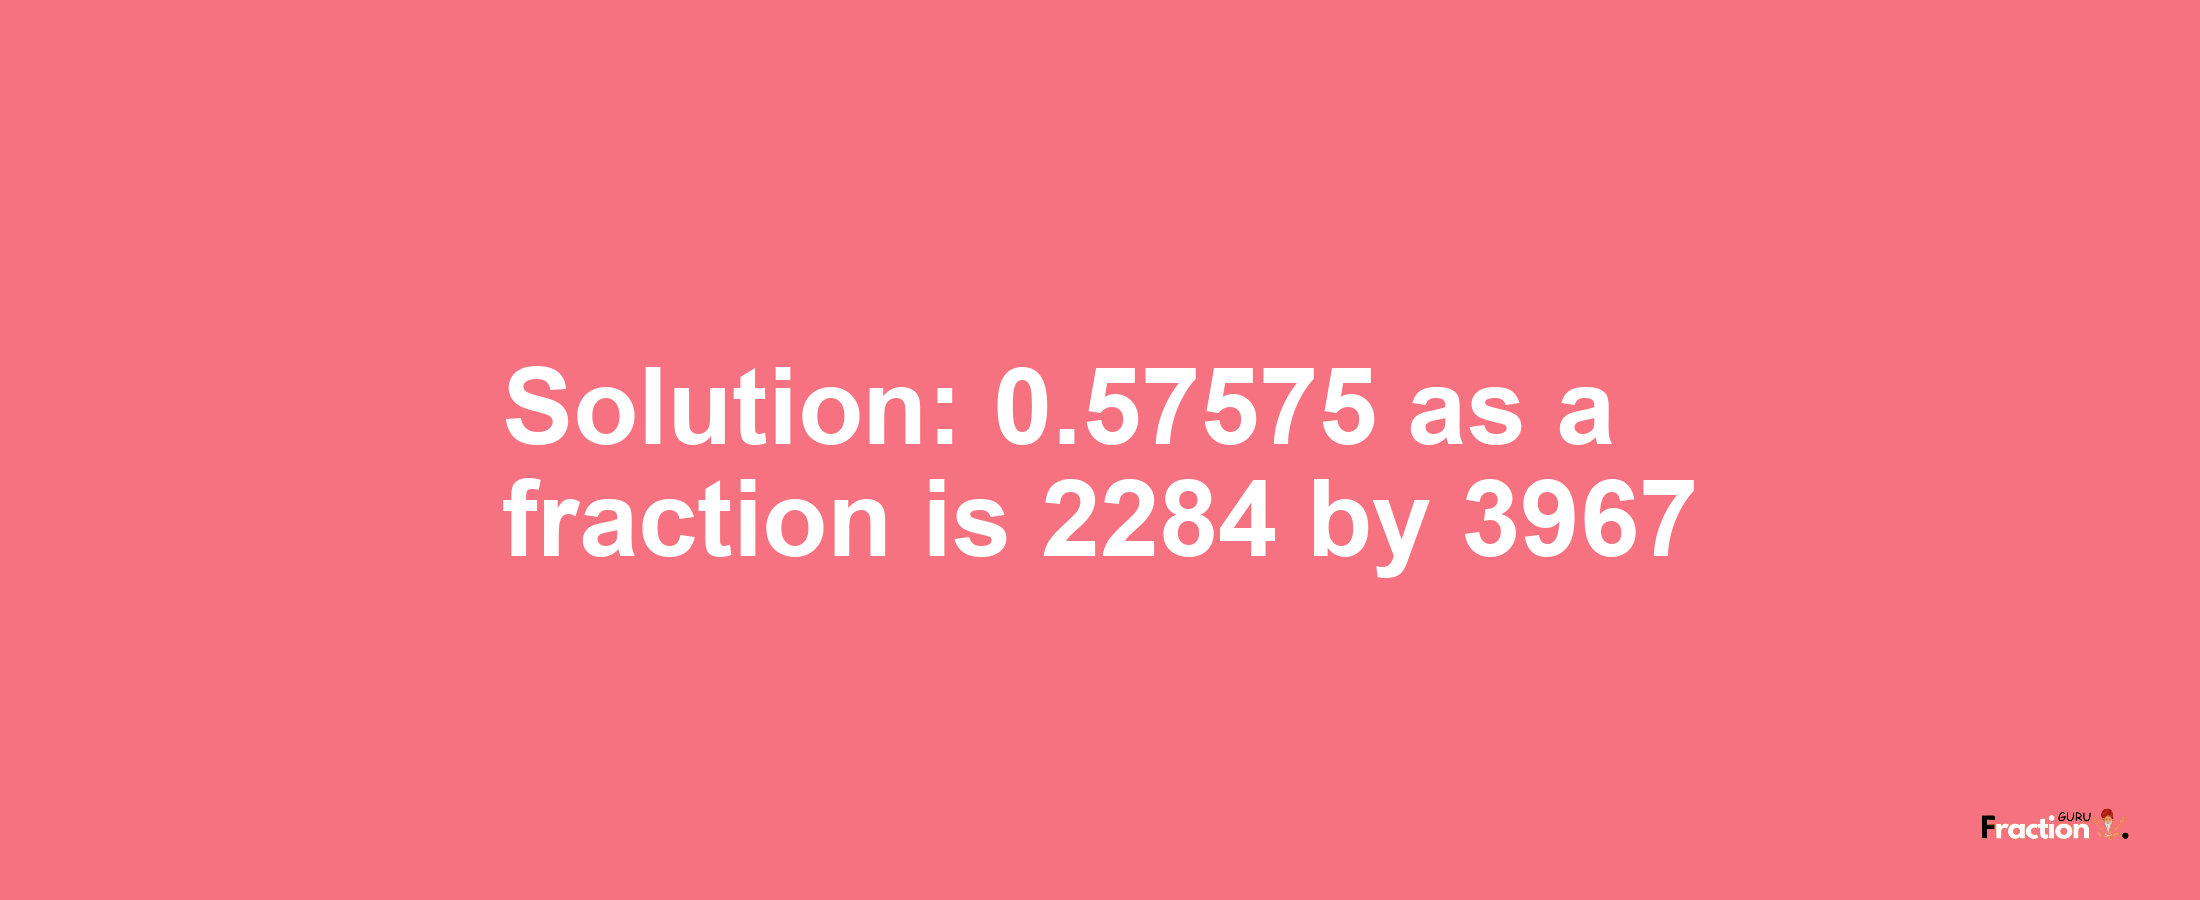 Solution:0.57575 as a fraction is 2284/3967